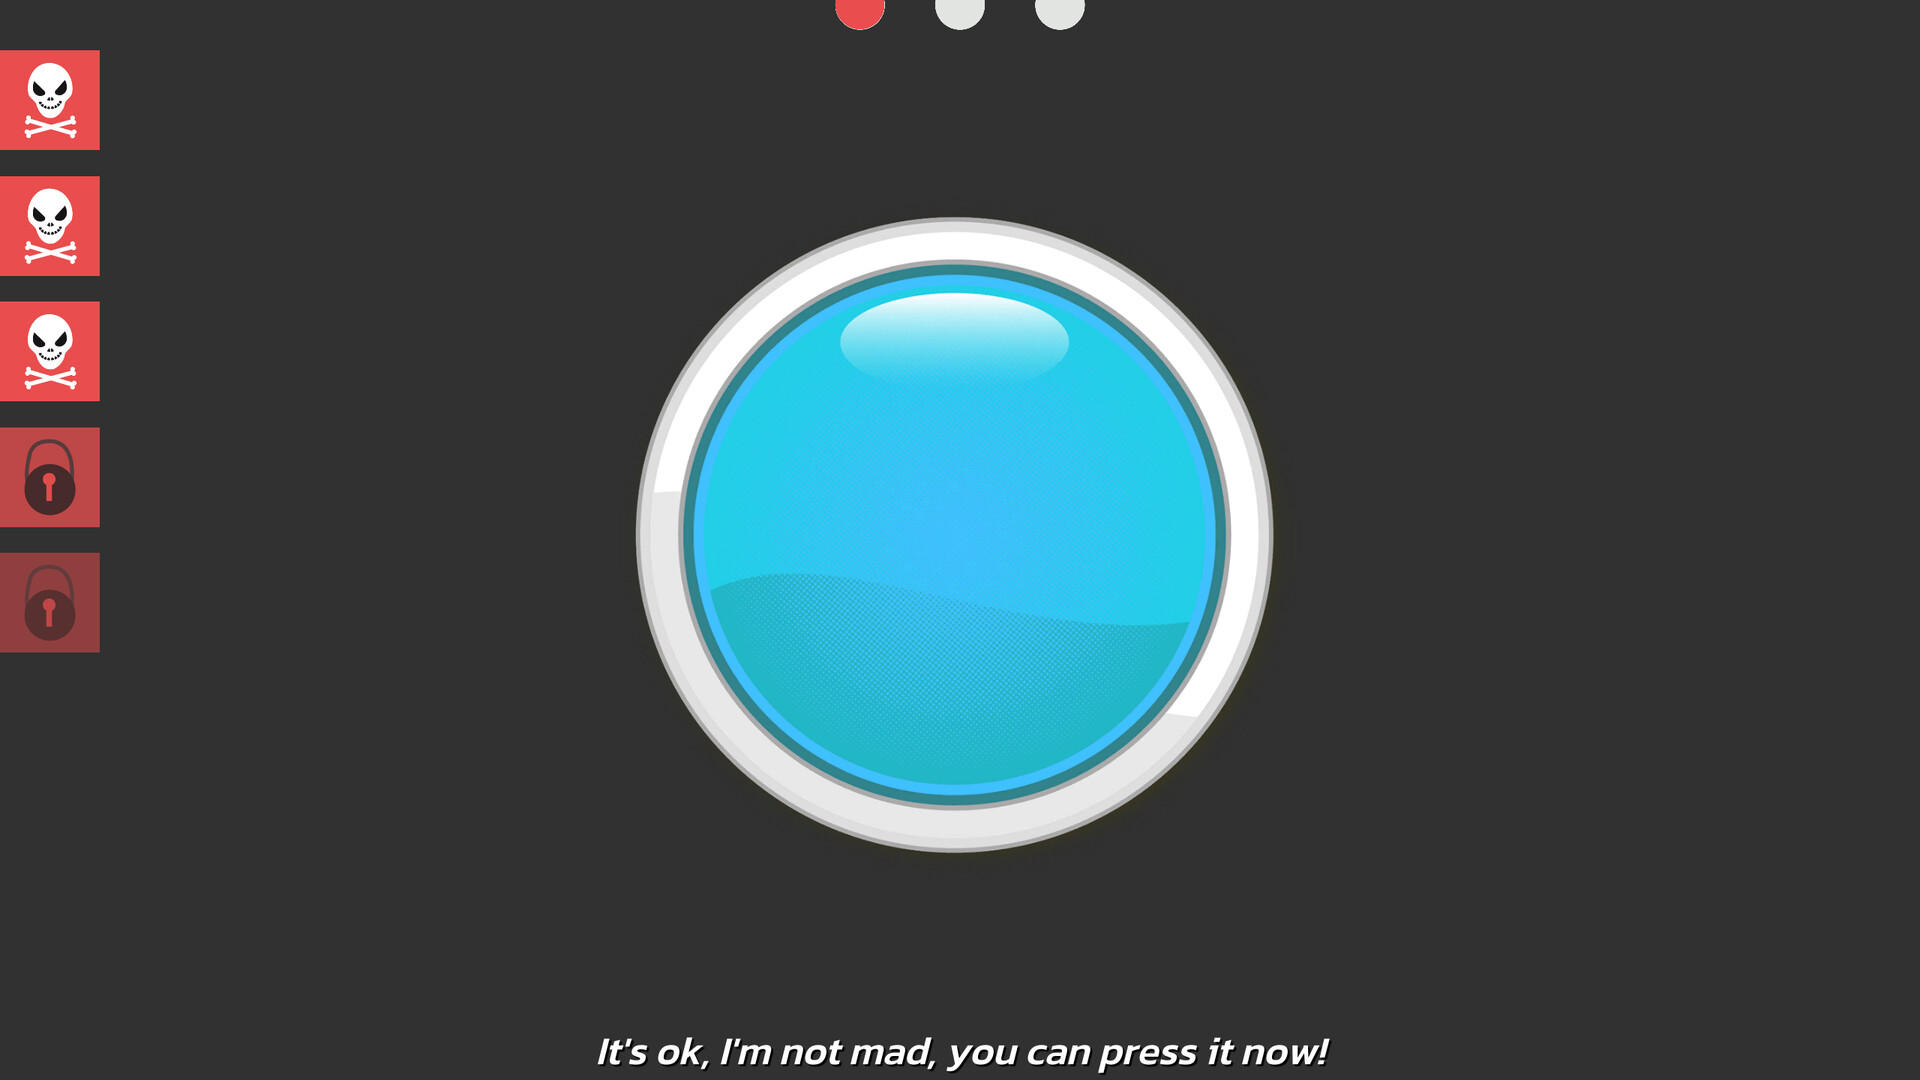 Screenshot of The Red Button